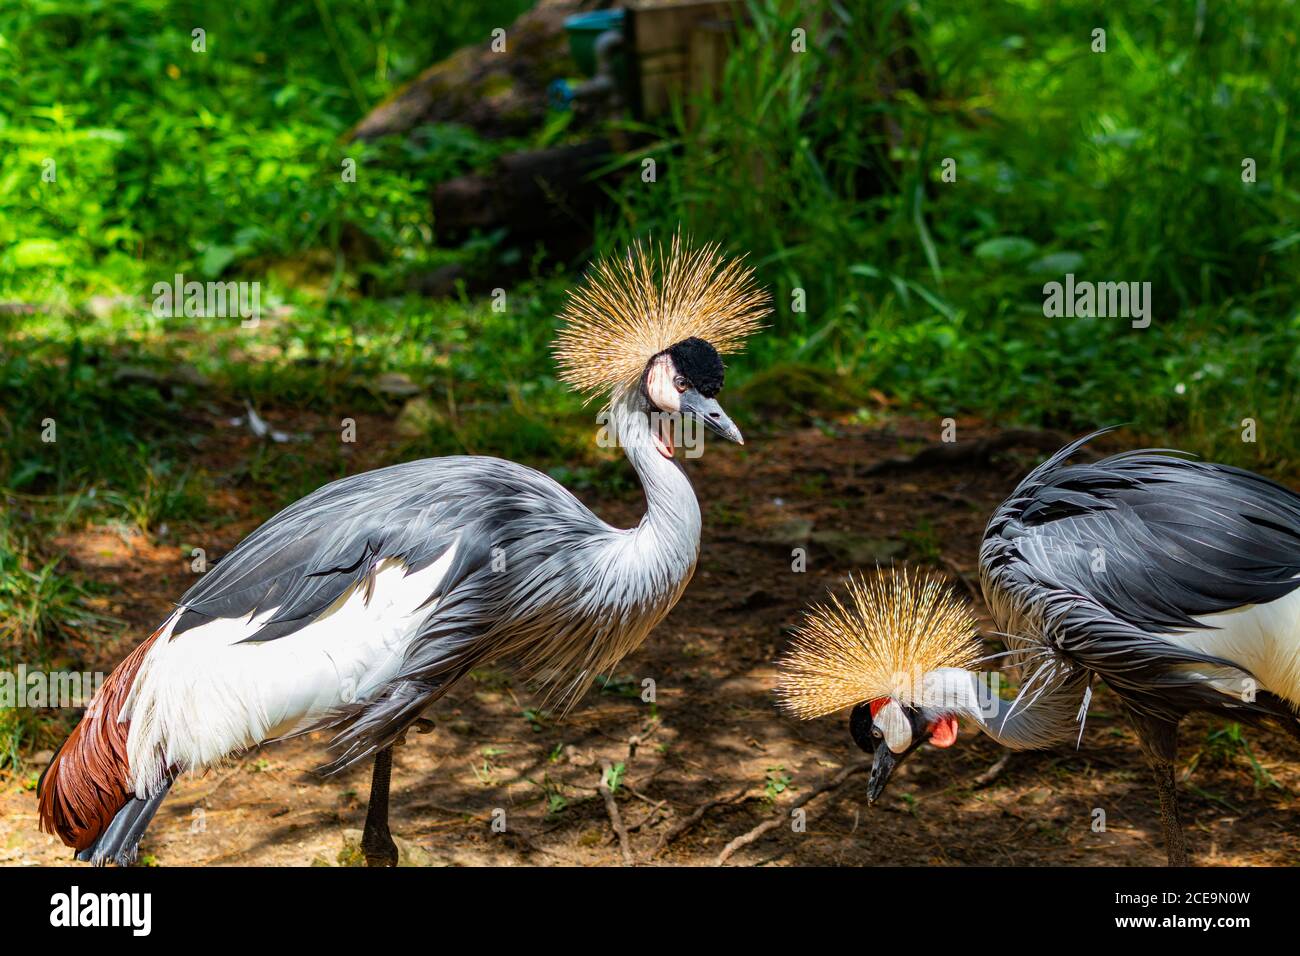 A pair of Black Crowned Cranes. One is feeding, standing on one leg. The other is also standing on one leg but its keeping a look out. Stock Photo